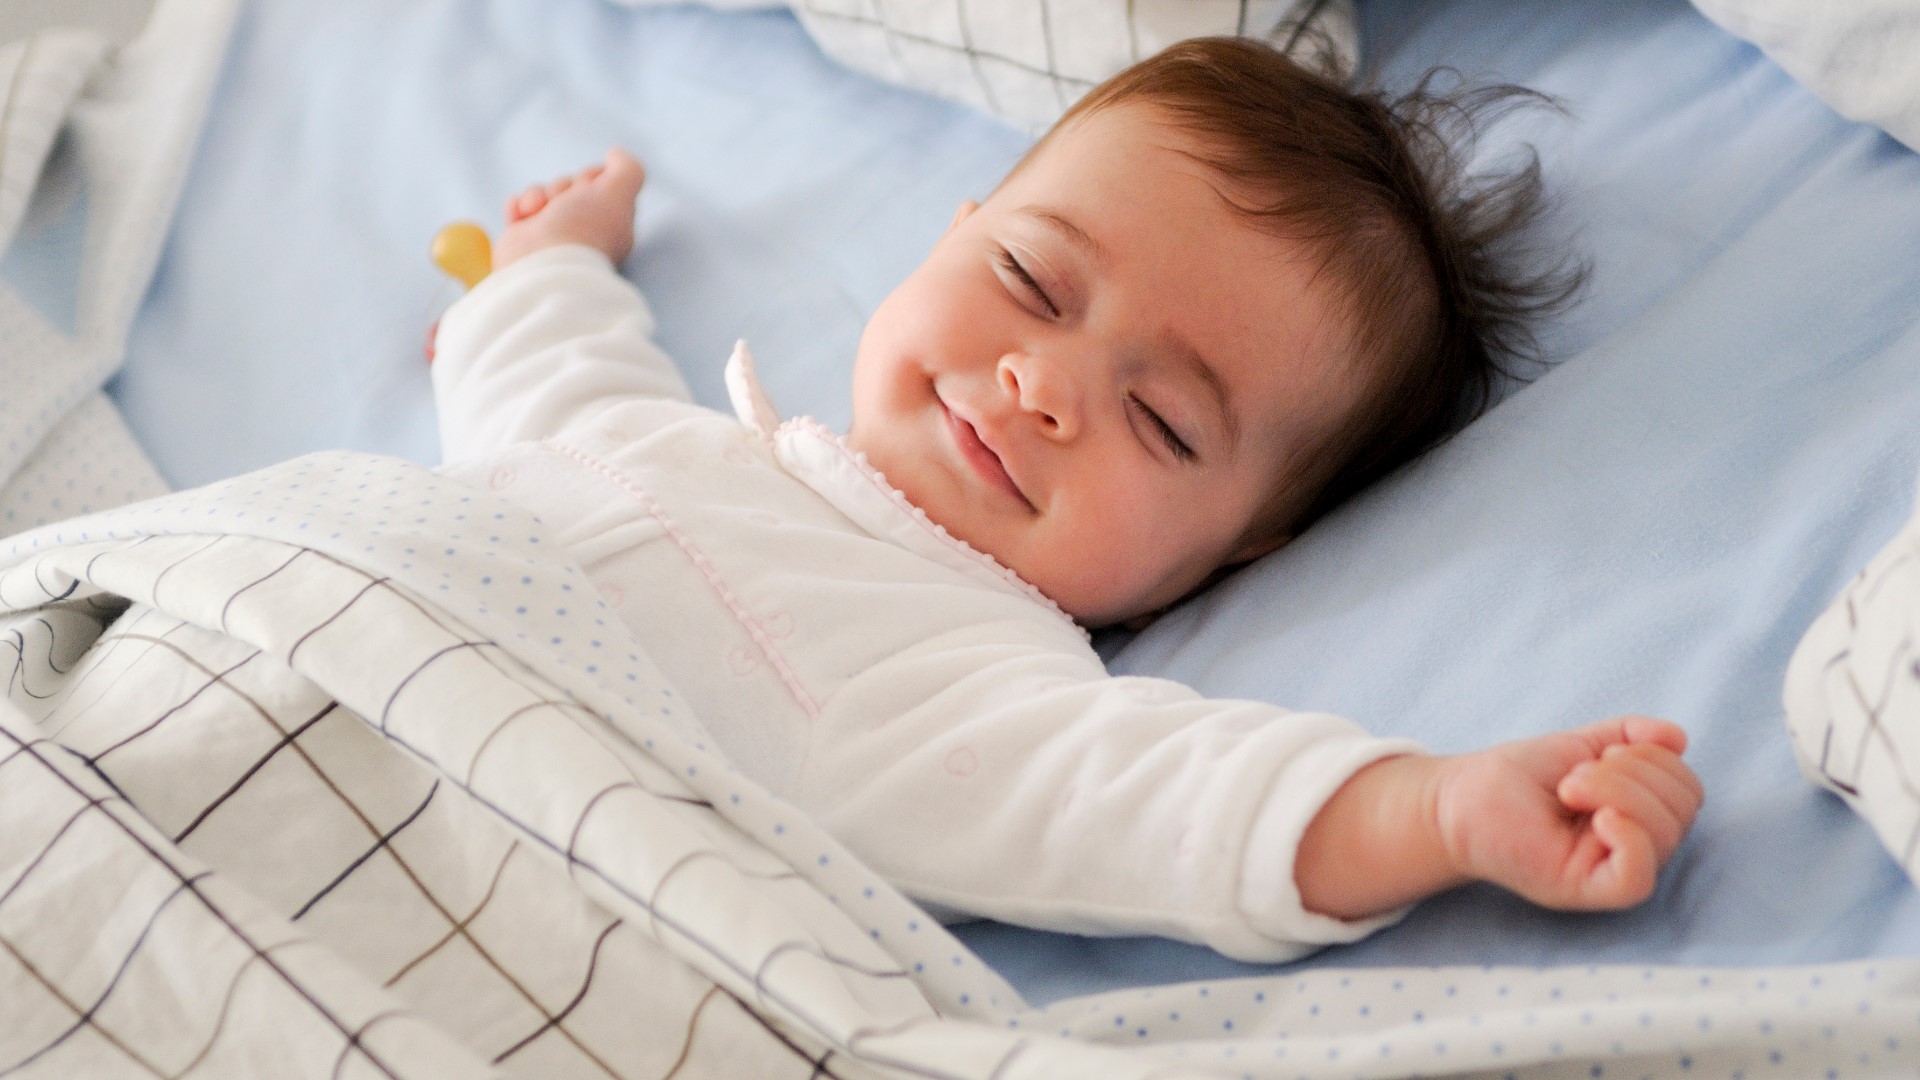 Certified Infant Massage Instructor and Founder of Kahlmi Elina Furman explains how babies can sleep better with an infant massage.